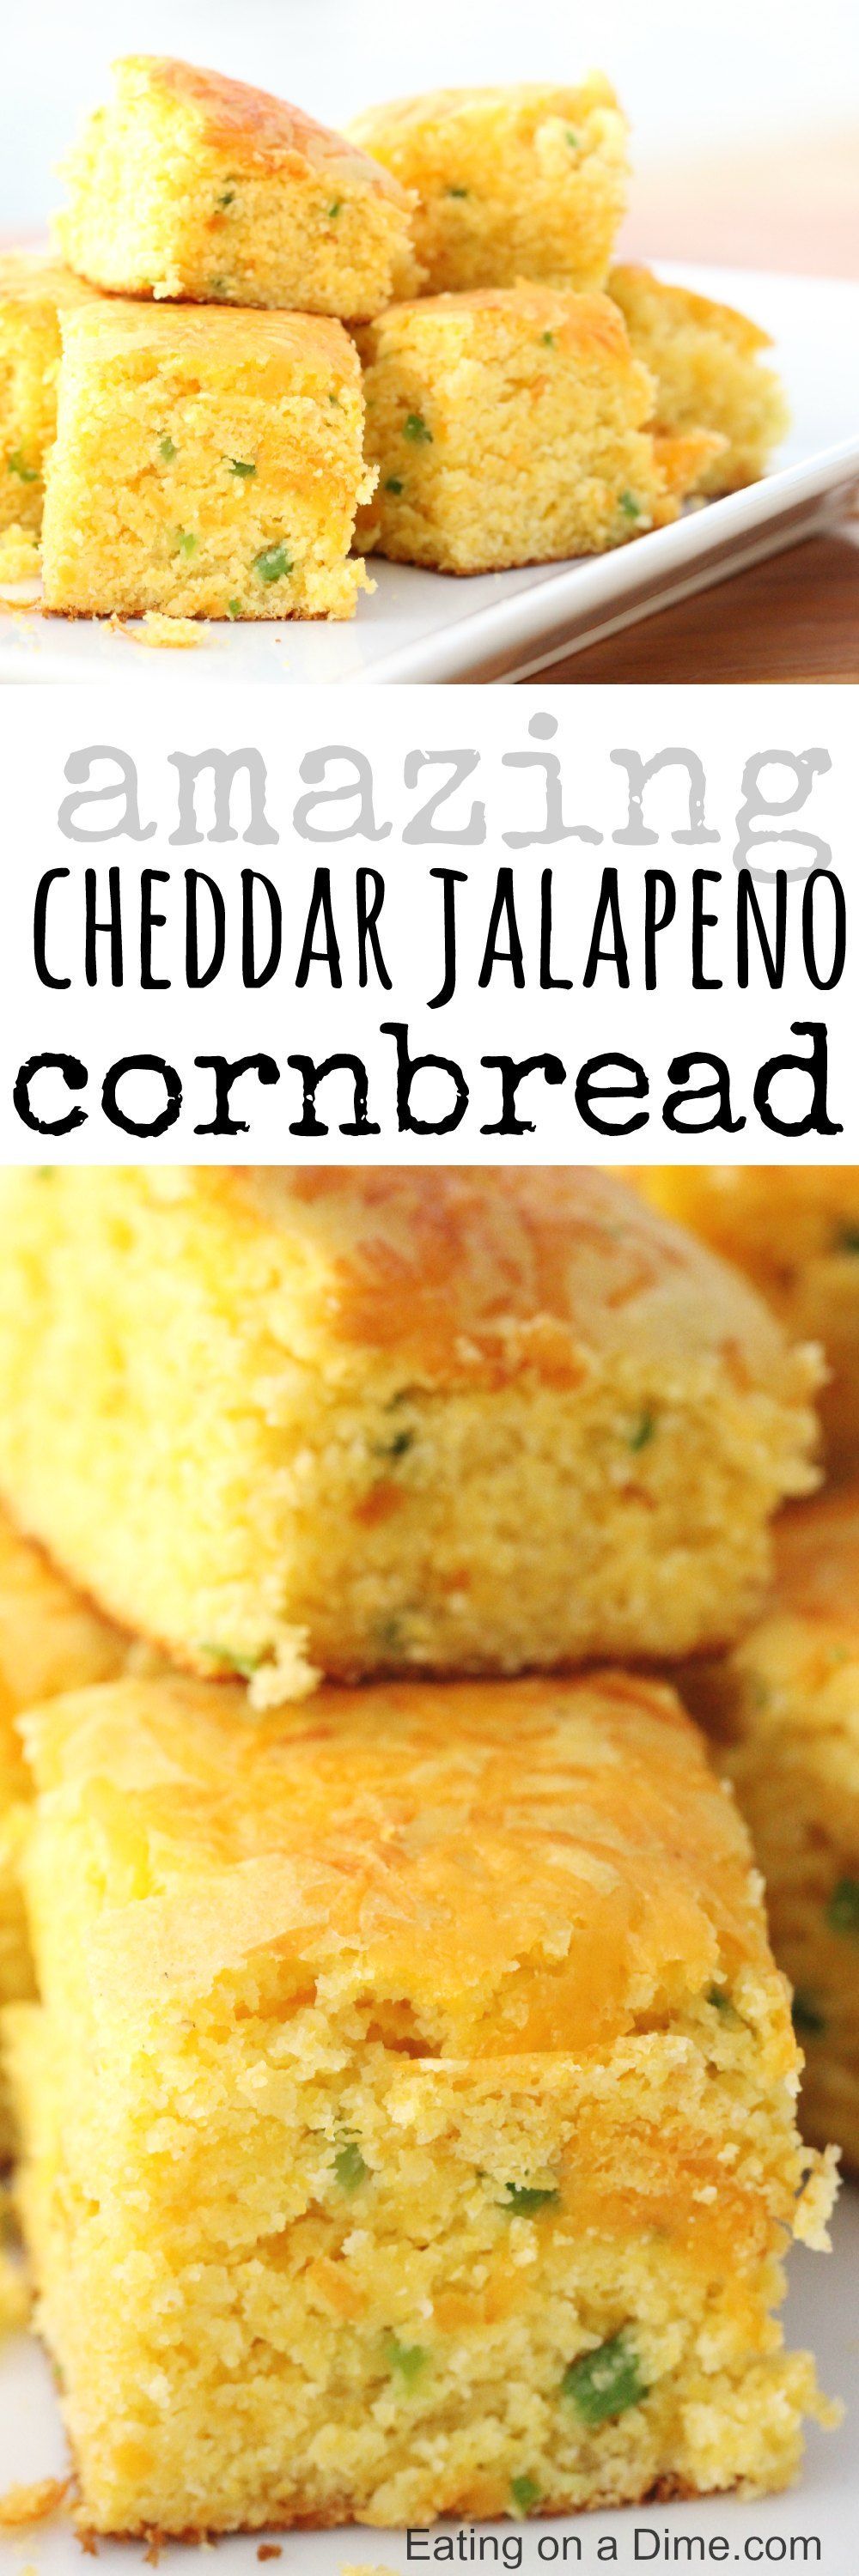 Cheddar Jalapeno Cornbread recipe.  Today I’m sharing with you a delicious cheddar jalapeño cornbread r